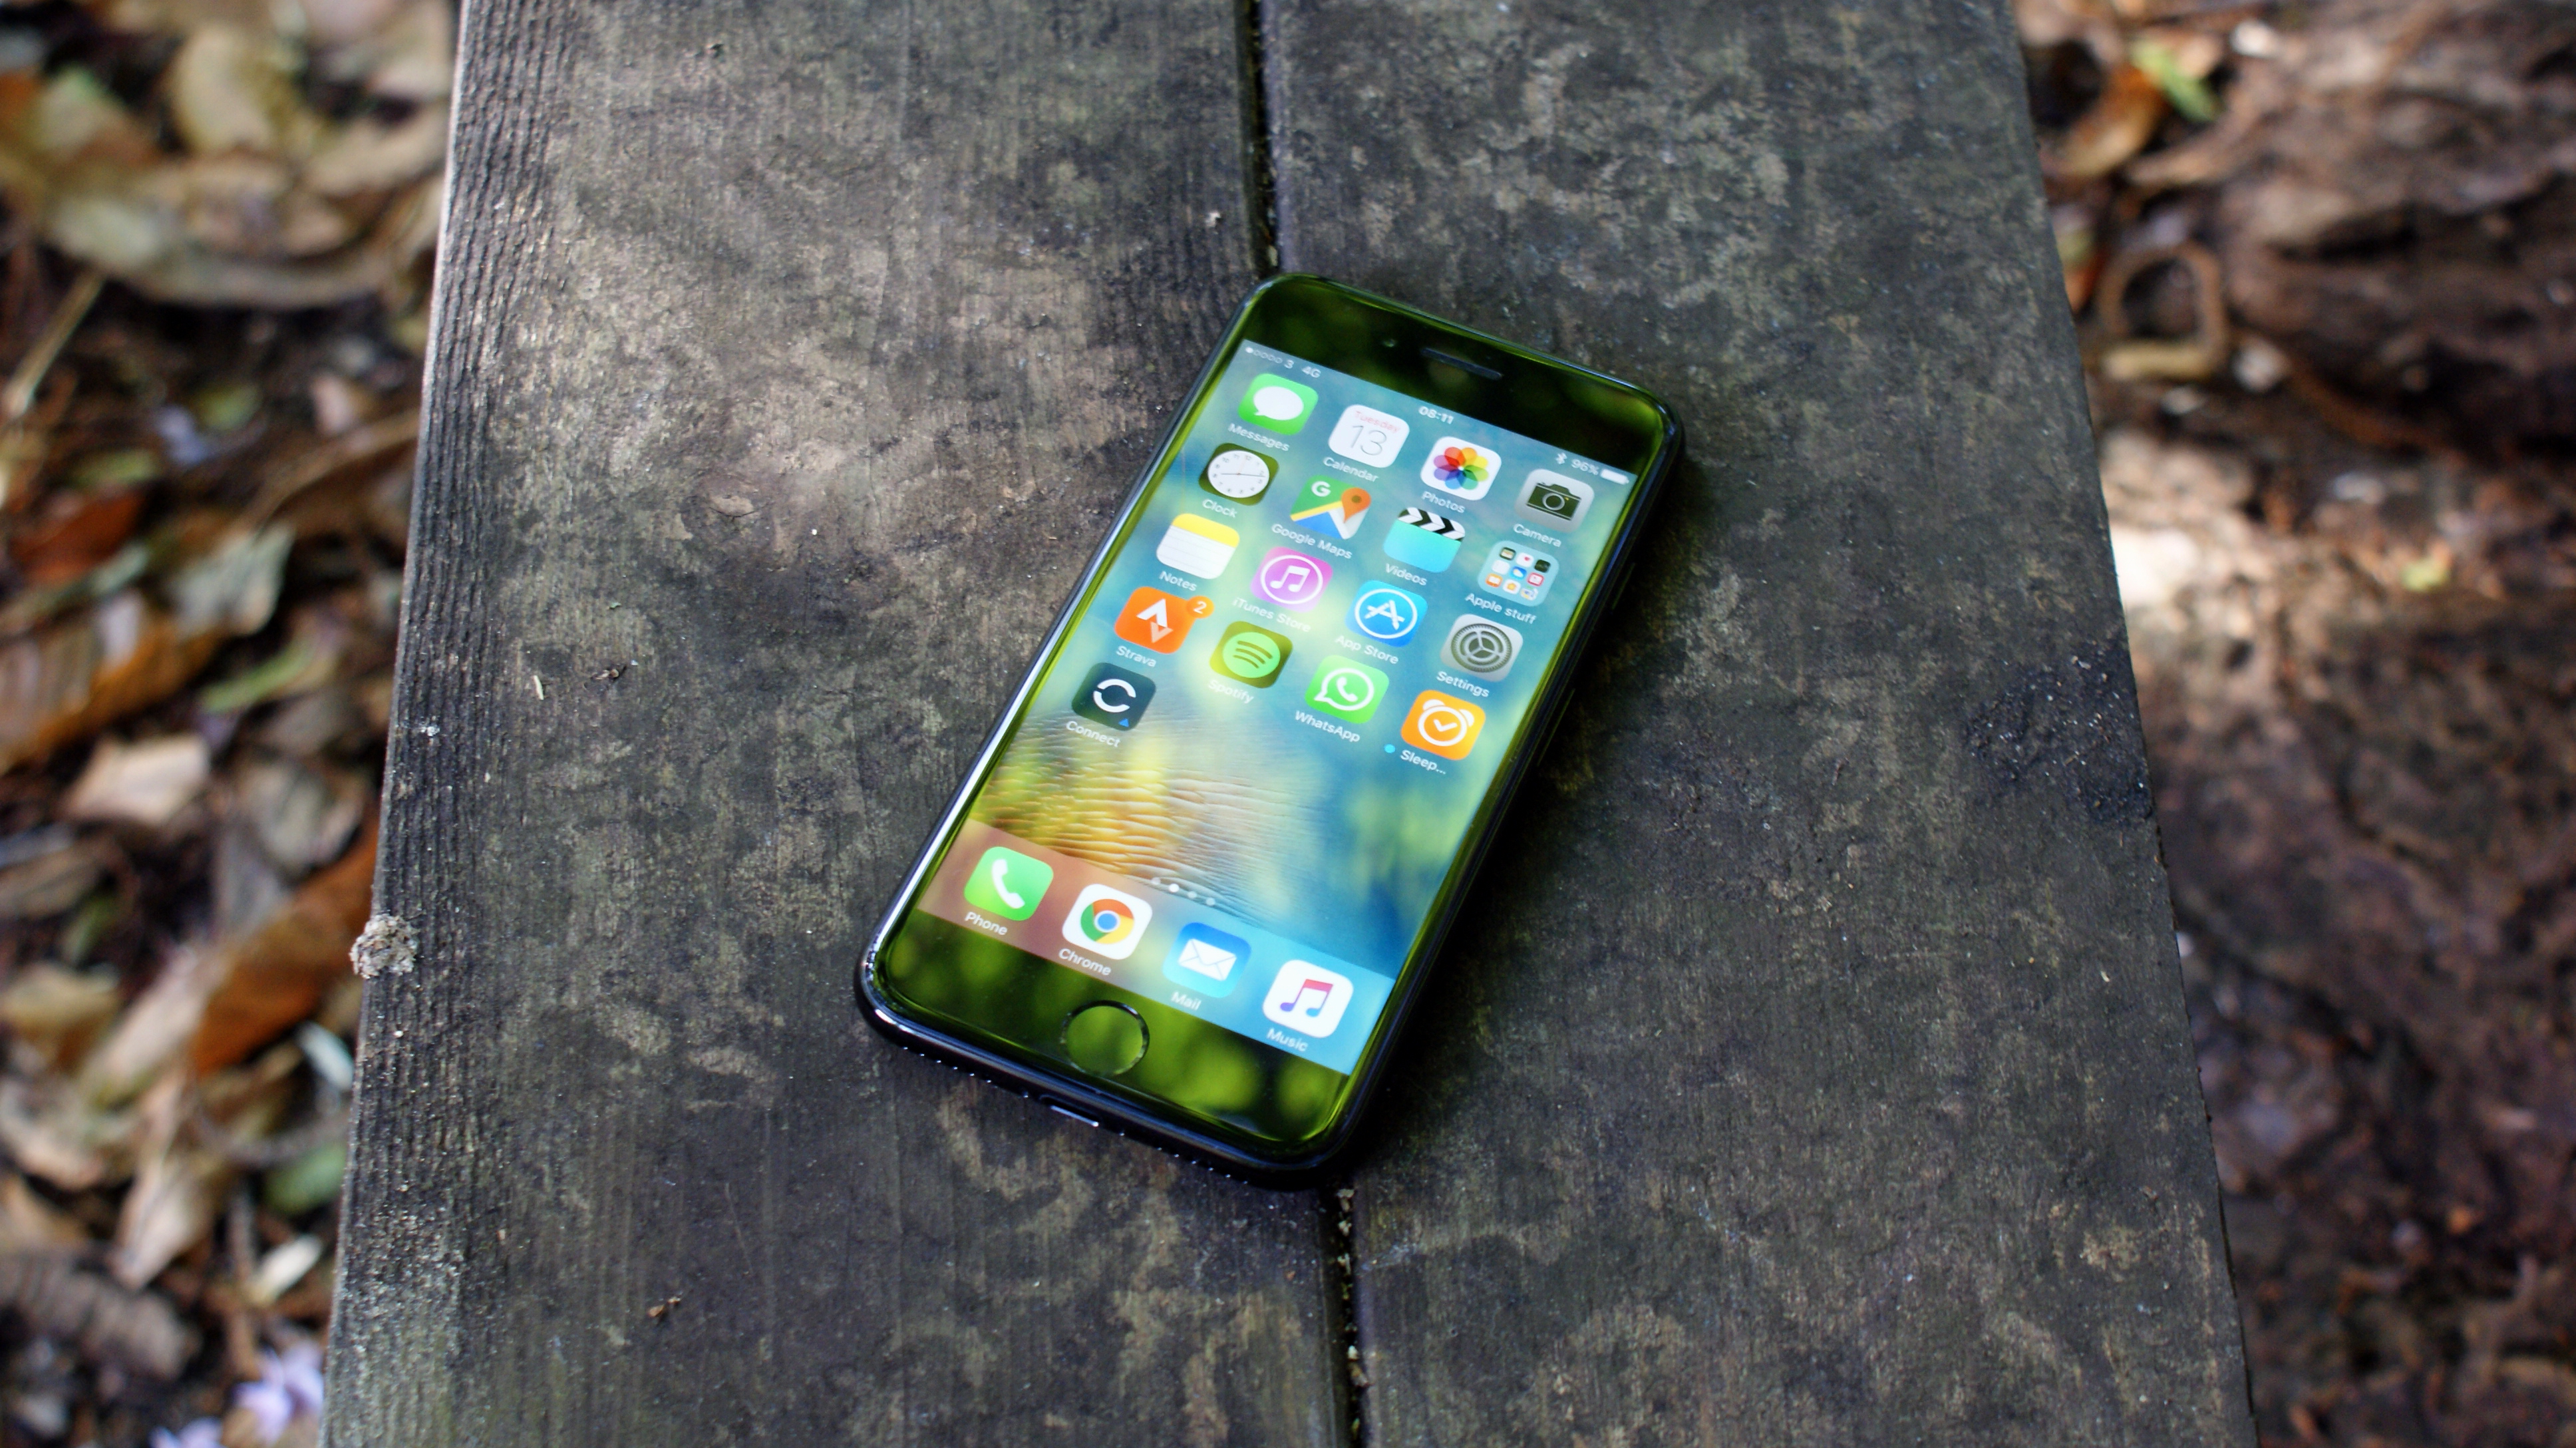 The iPhone 8 could have a plastic, curved screen and new sensing